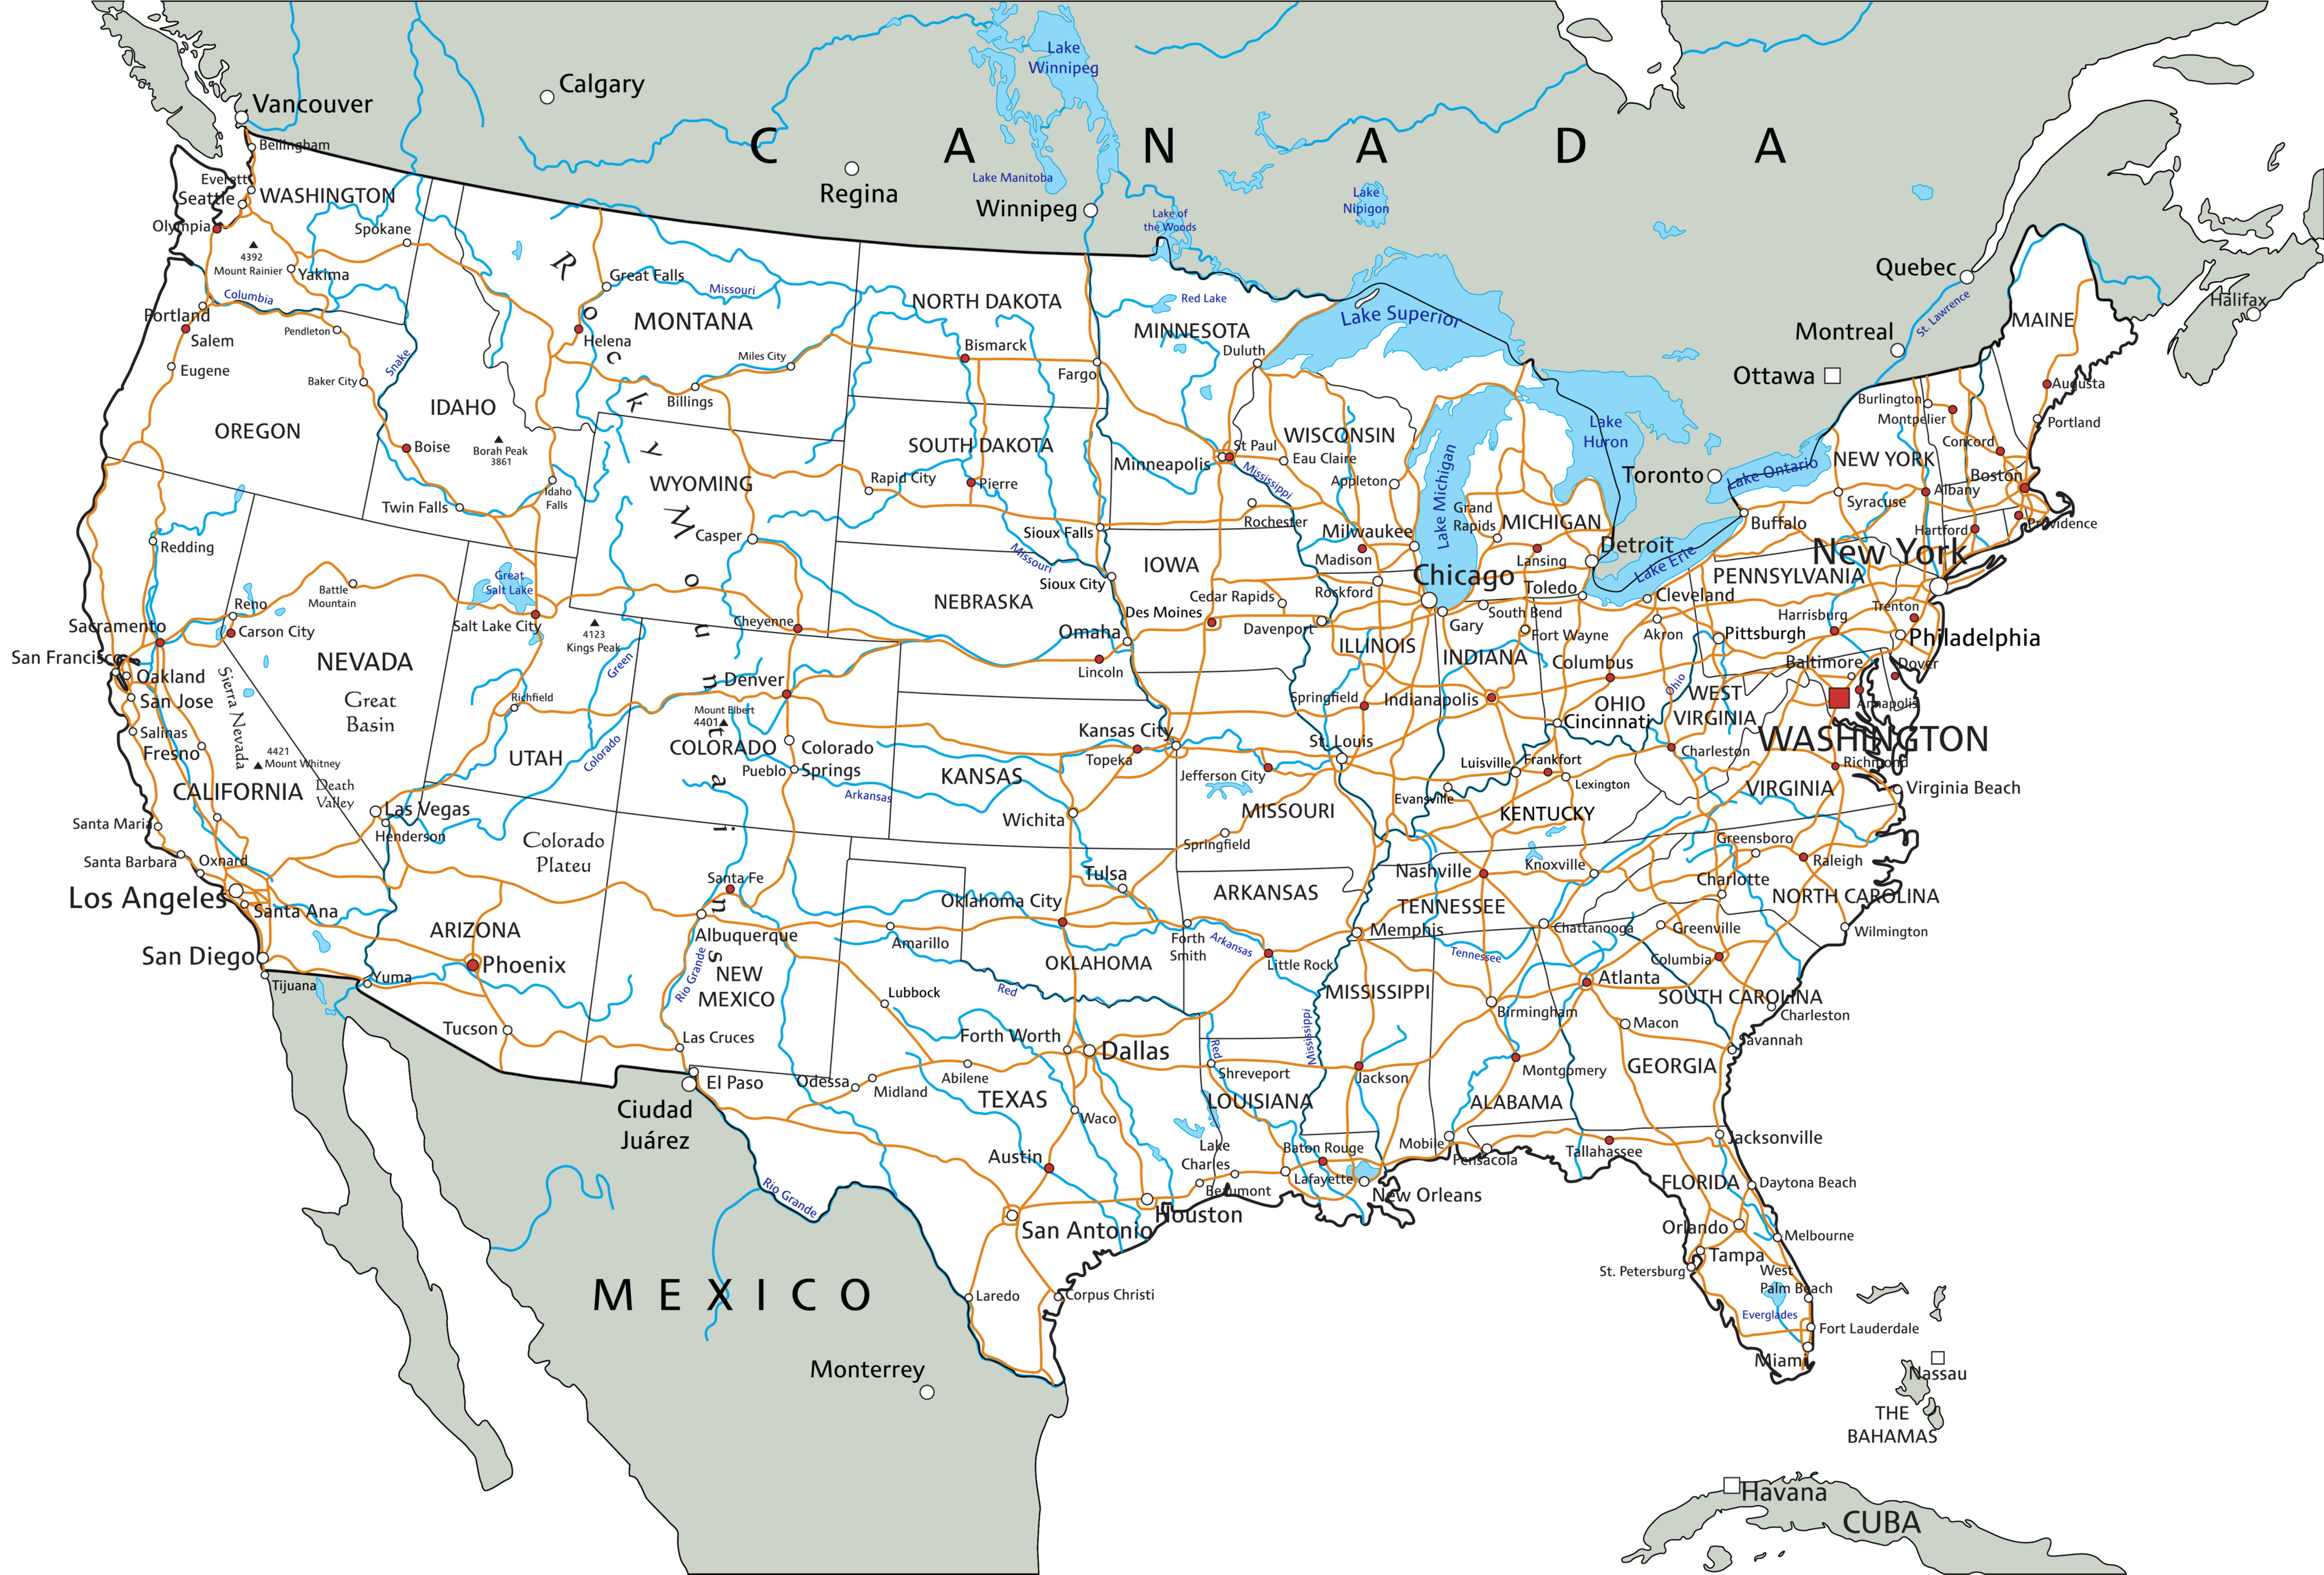 map-of-usa-highways-and-cities-topographic-map-of-usa-with-states